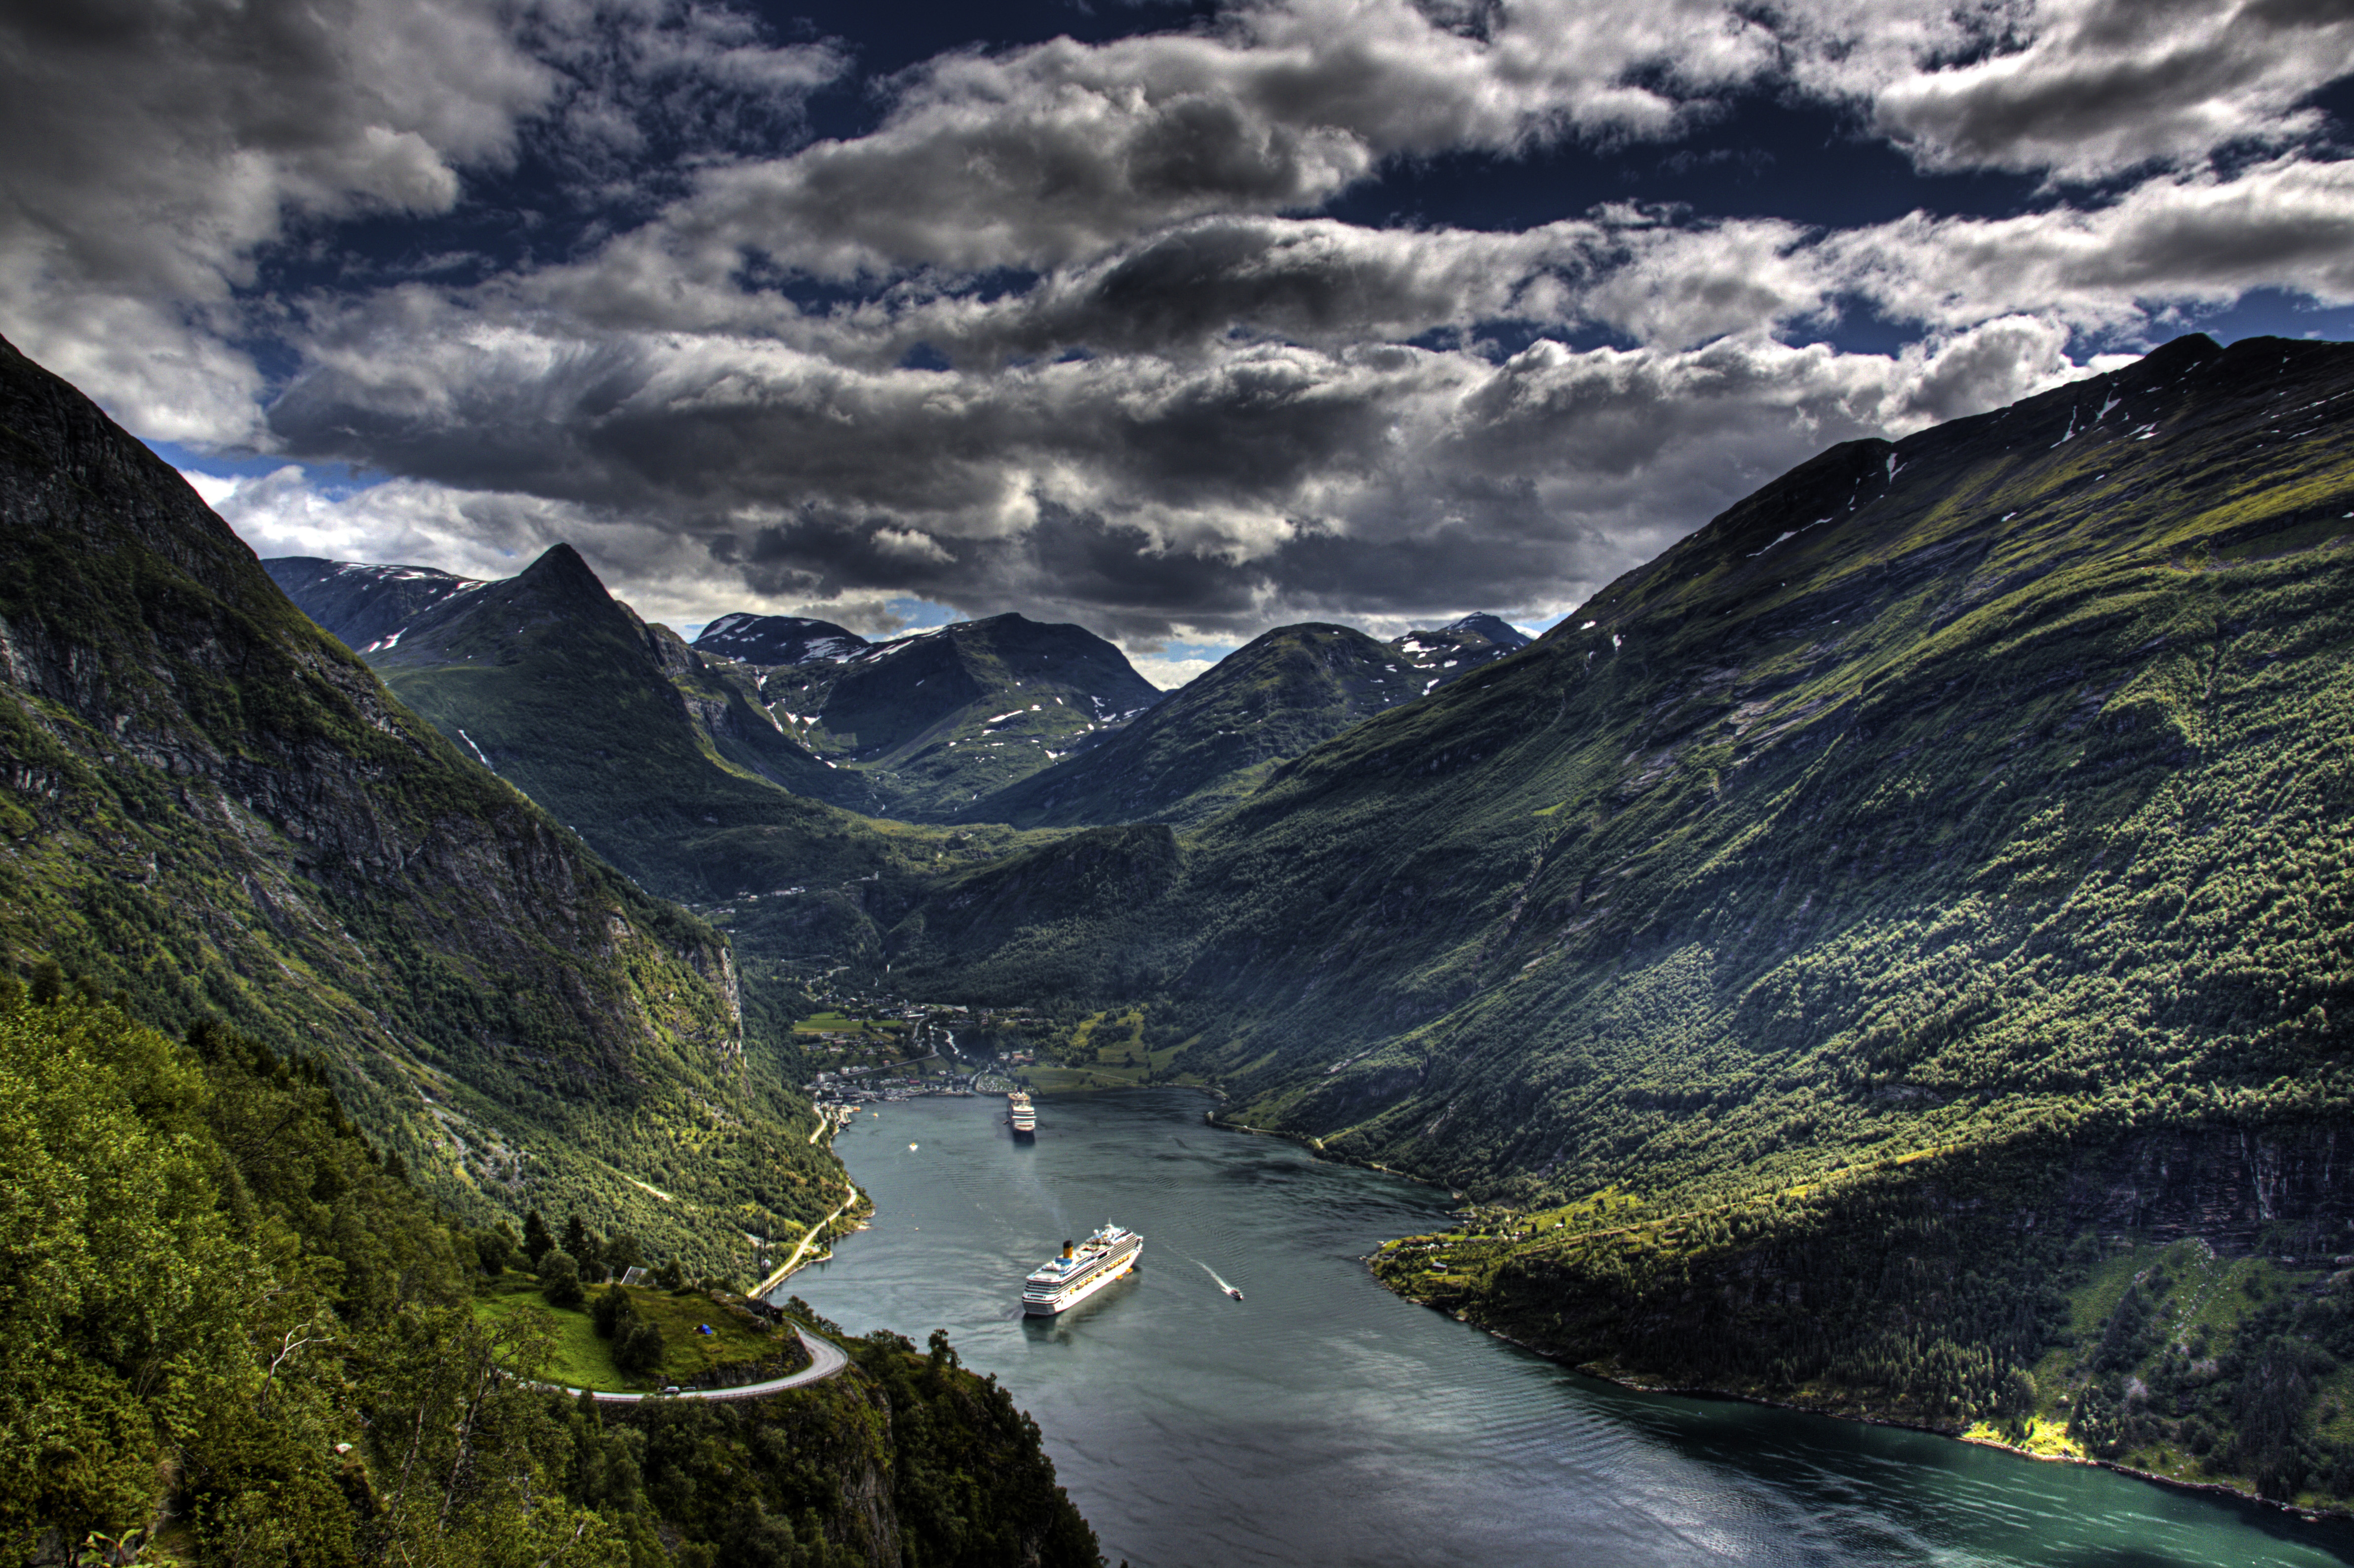 Fjords Screensaver 8 Image Windows 10 Theme, Majestic Highlights Of Norway 10 Days 9 Nights Norway Self Drive, From Bergen To The Fjords Norwegian Fjords Western Norway, Beautiful Norway Windows